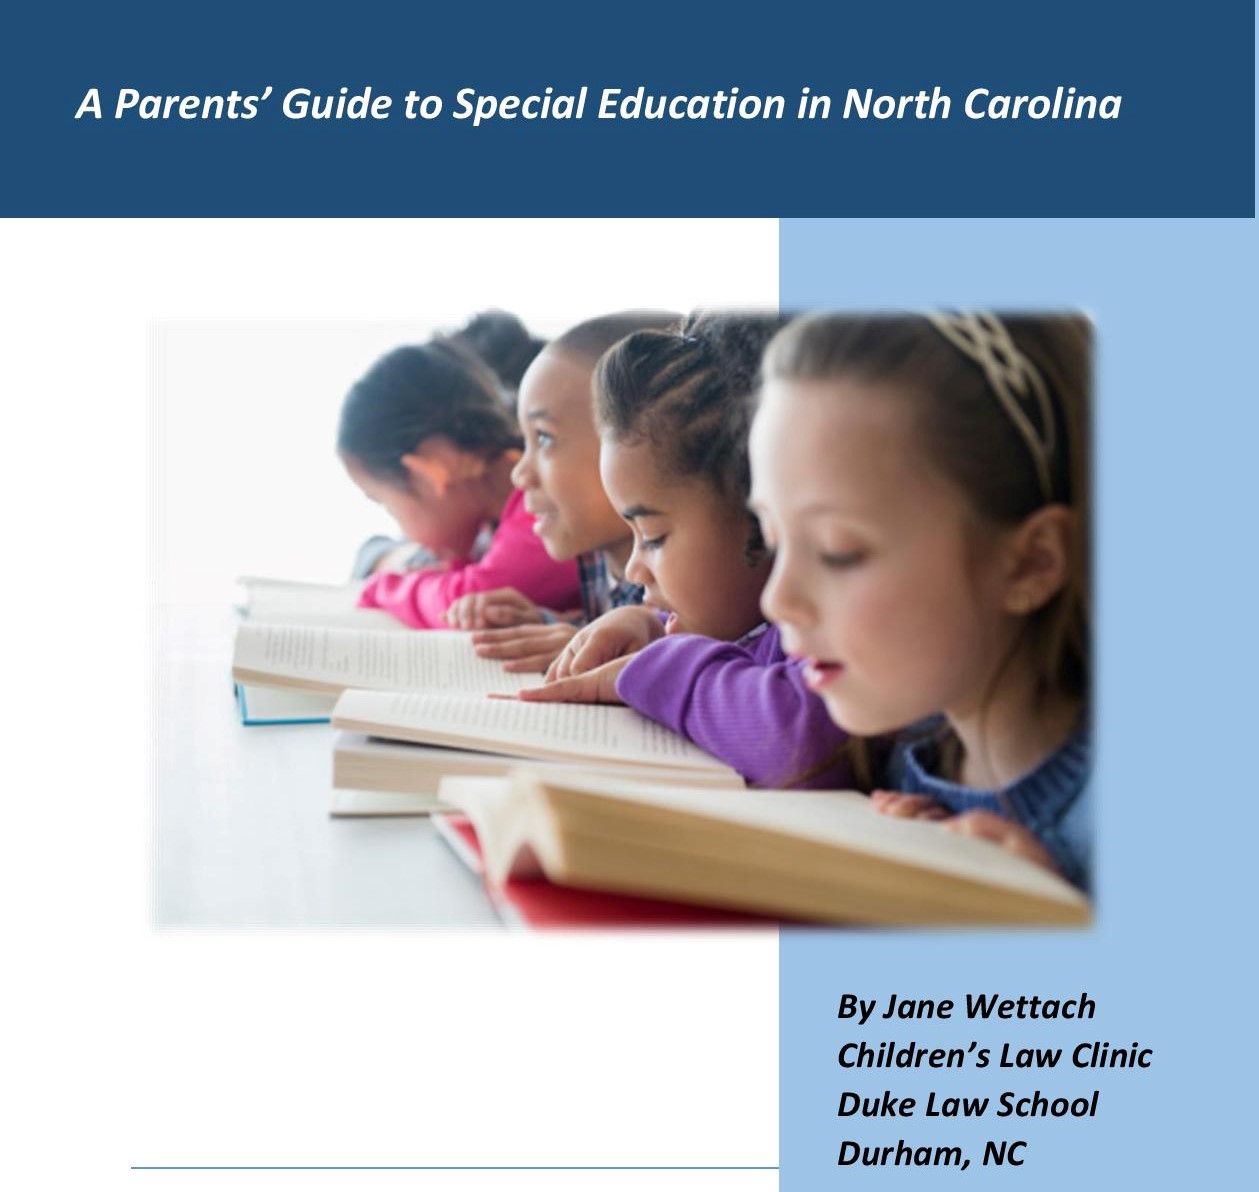 Image of children reading with text that says A Parents’ Guide to Special Education in North Carolina